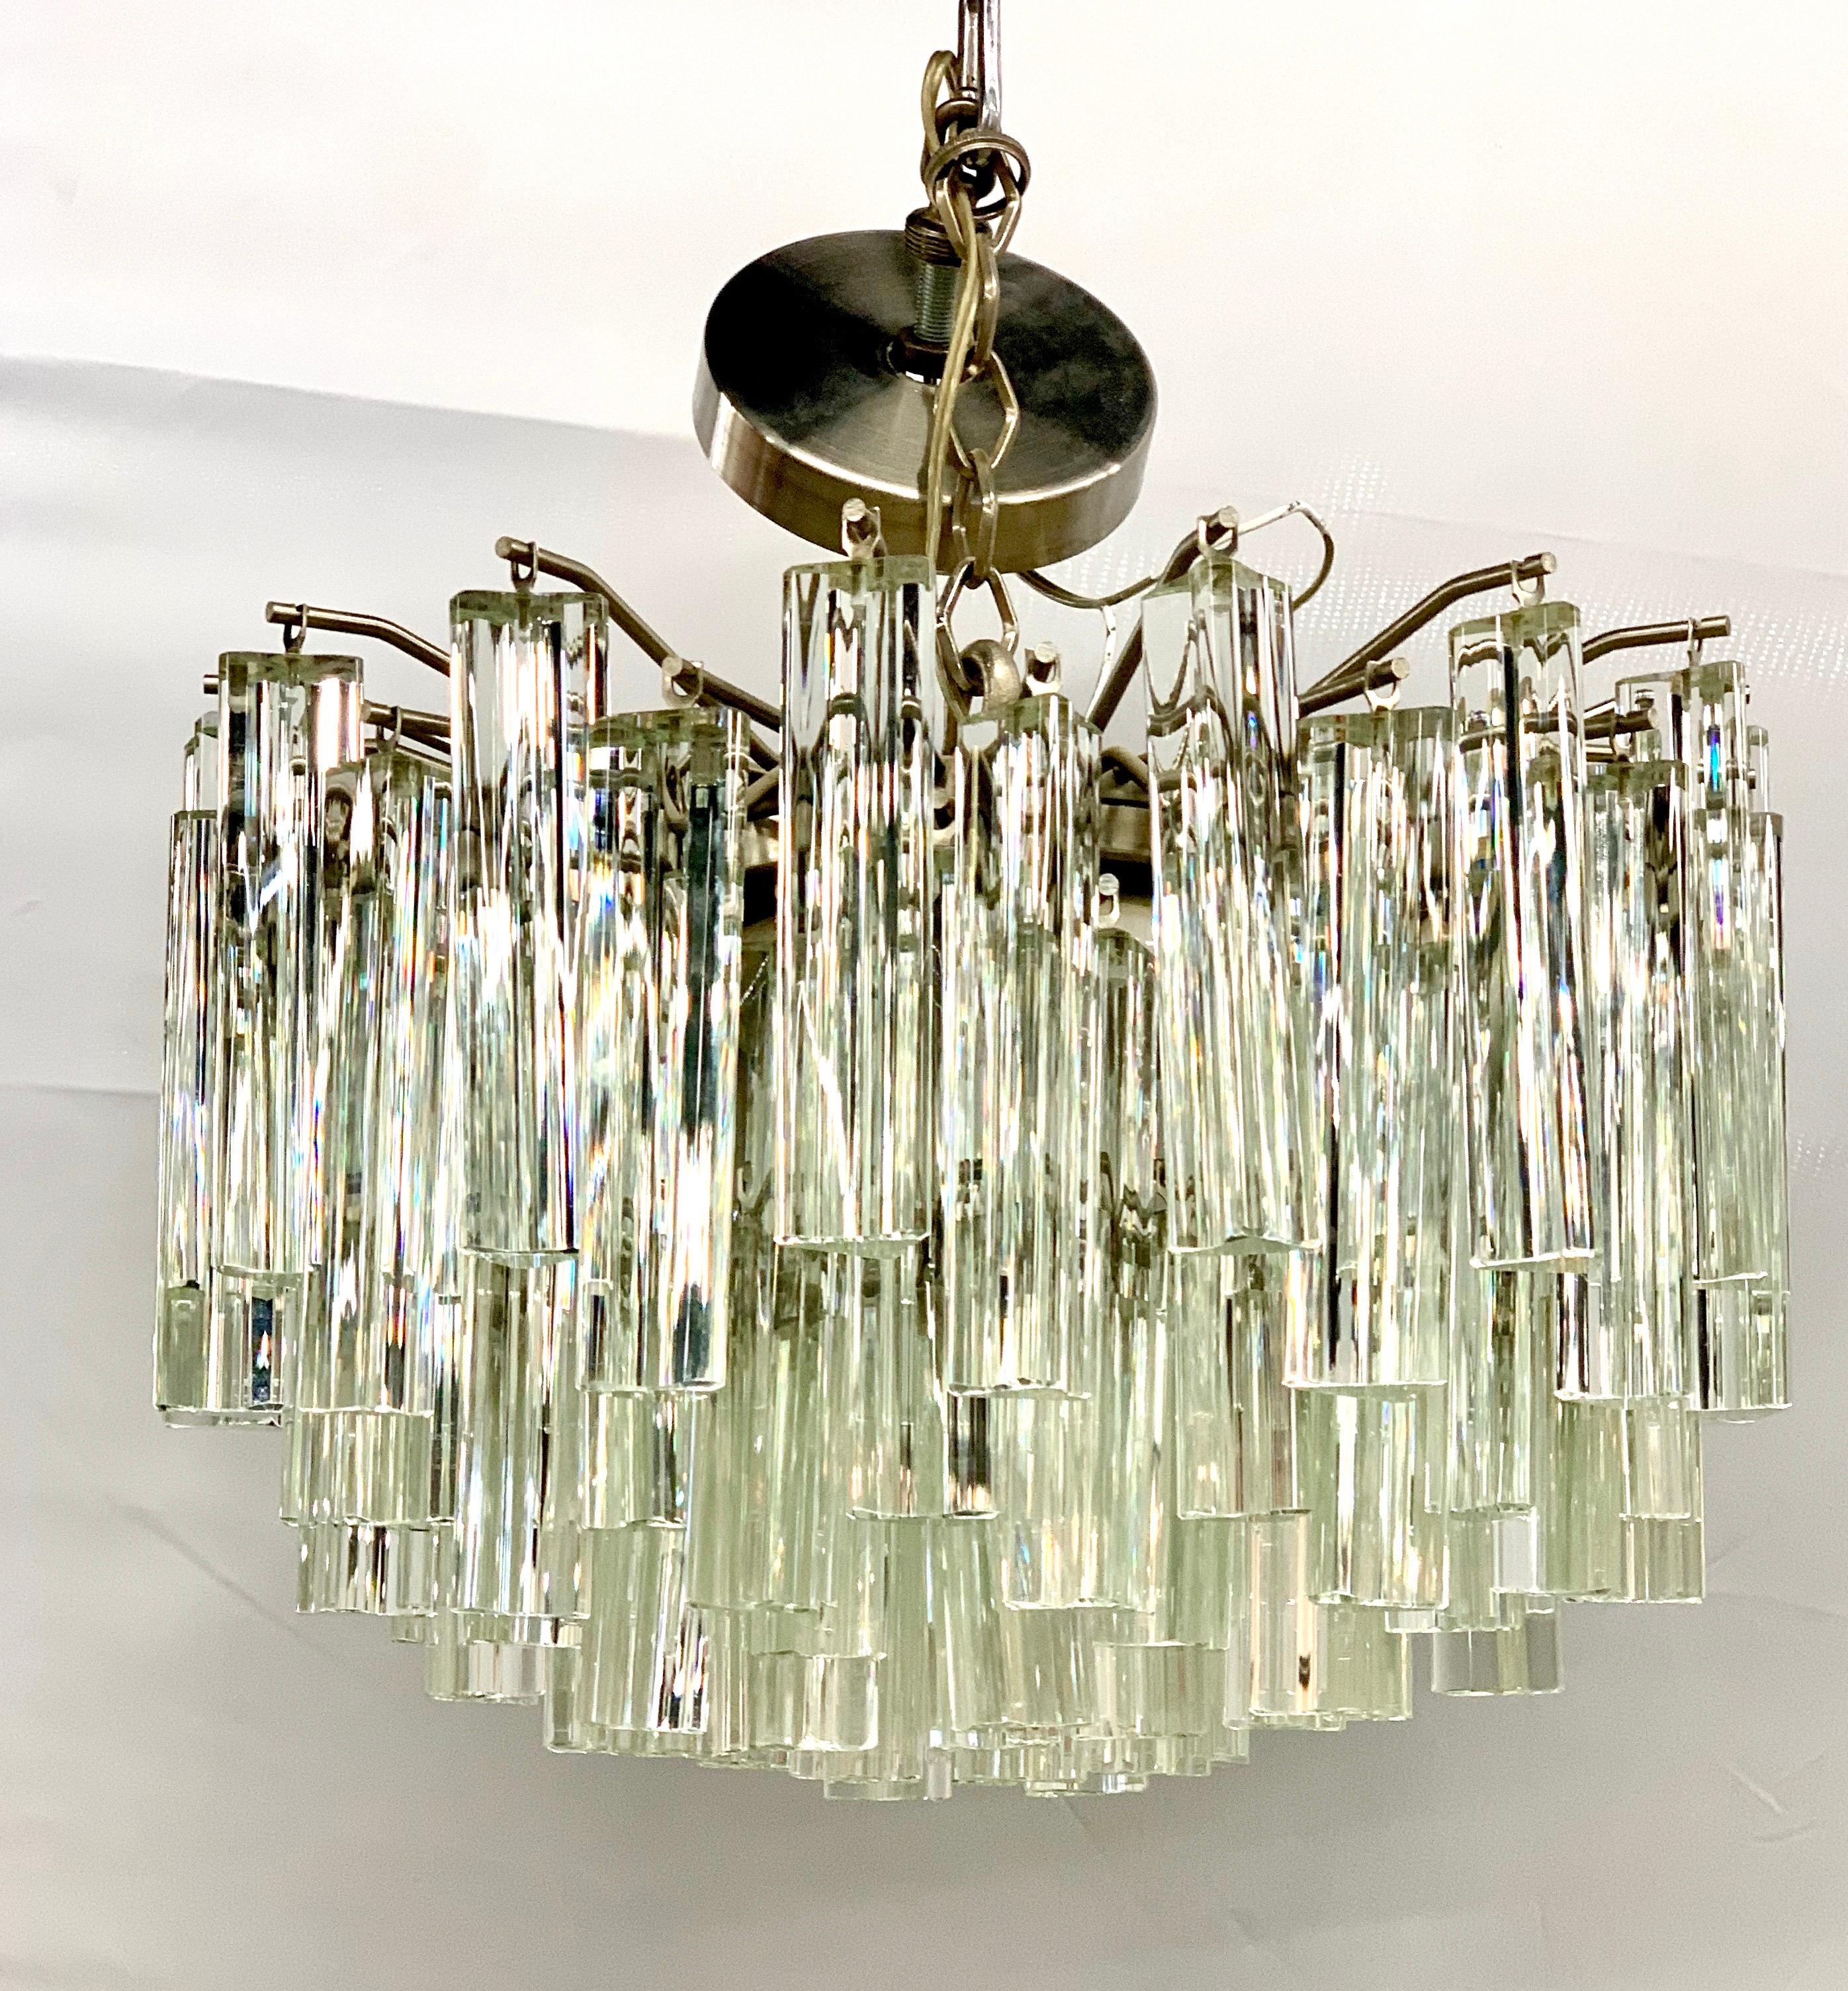 Stunning Camer Glass prism chandelier that features individual prisms that attach to the fixture and that is attached to a steel chain to the ceiling, see pics. Camer glass chandeliers are true period pieces from the 1970s and have been featured in